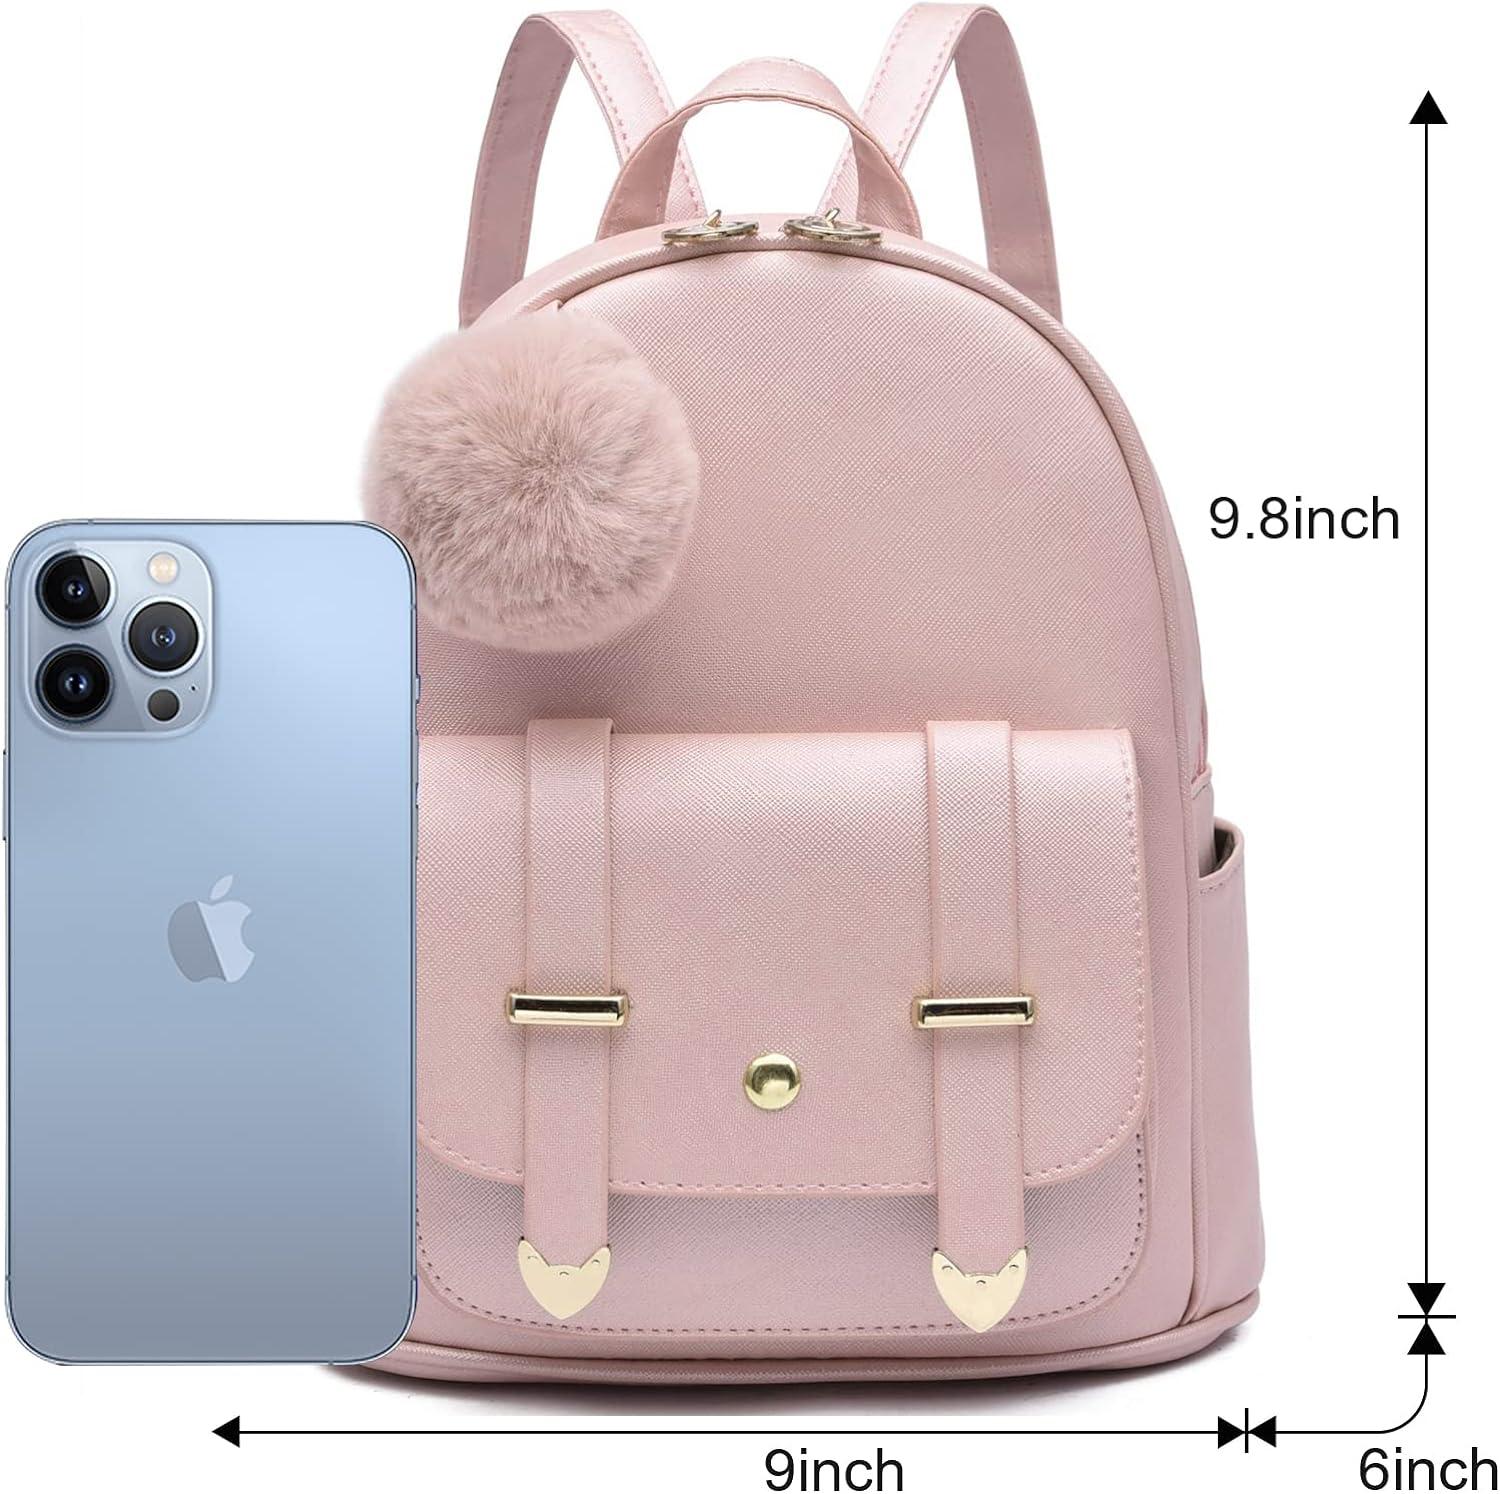 Premium Quality Large Capacity Unicorn Embroidery Printed School Bags